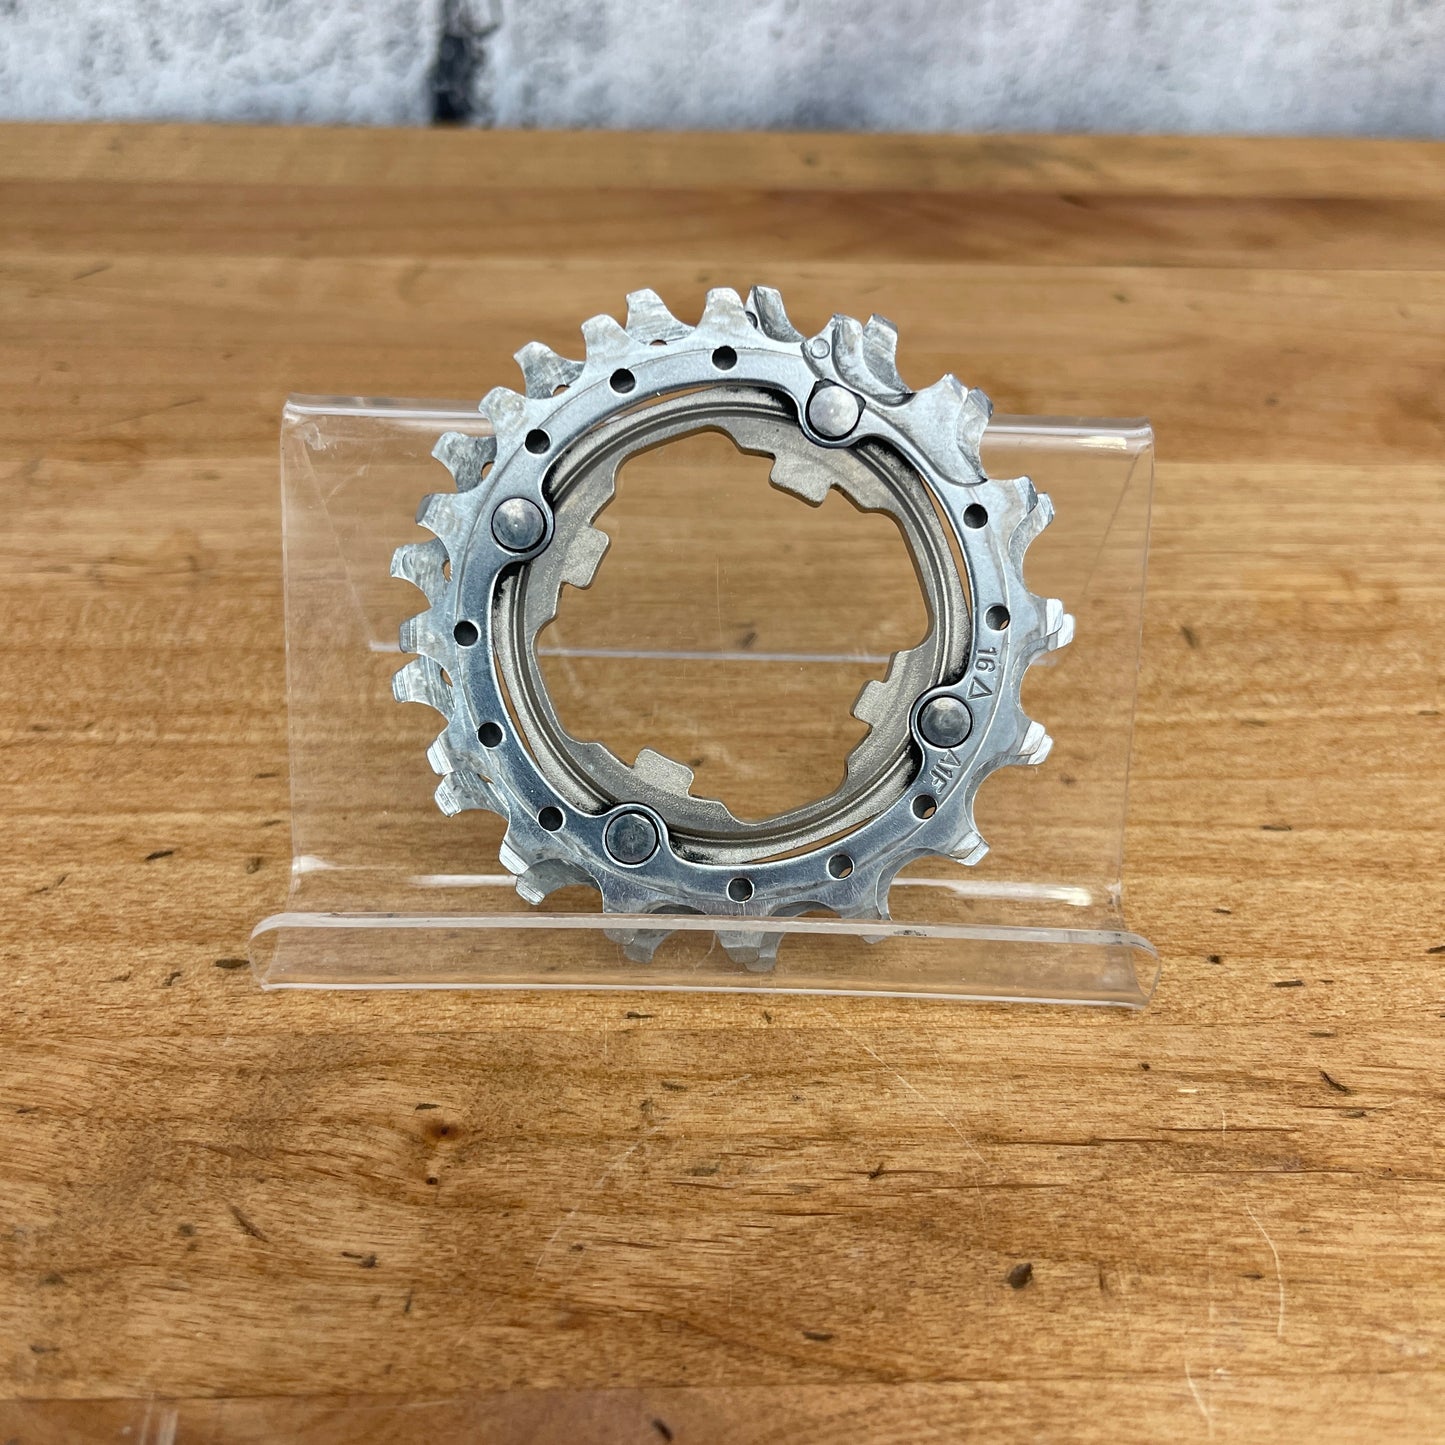 Campagnolo Chorus Ultra Drive 10-Speed 16/17t Cassette Sprocket